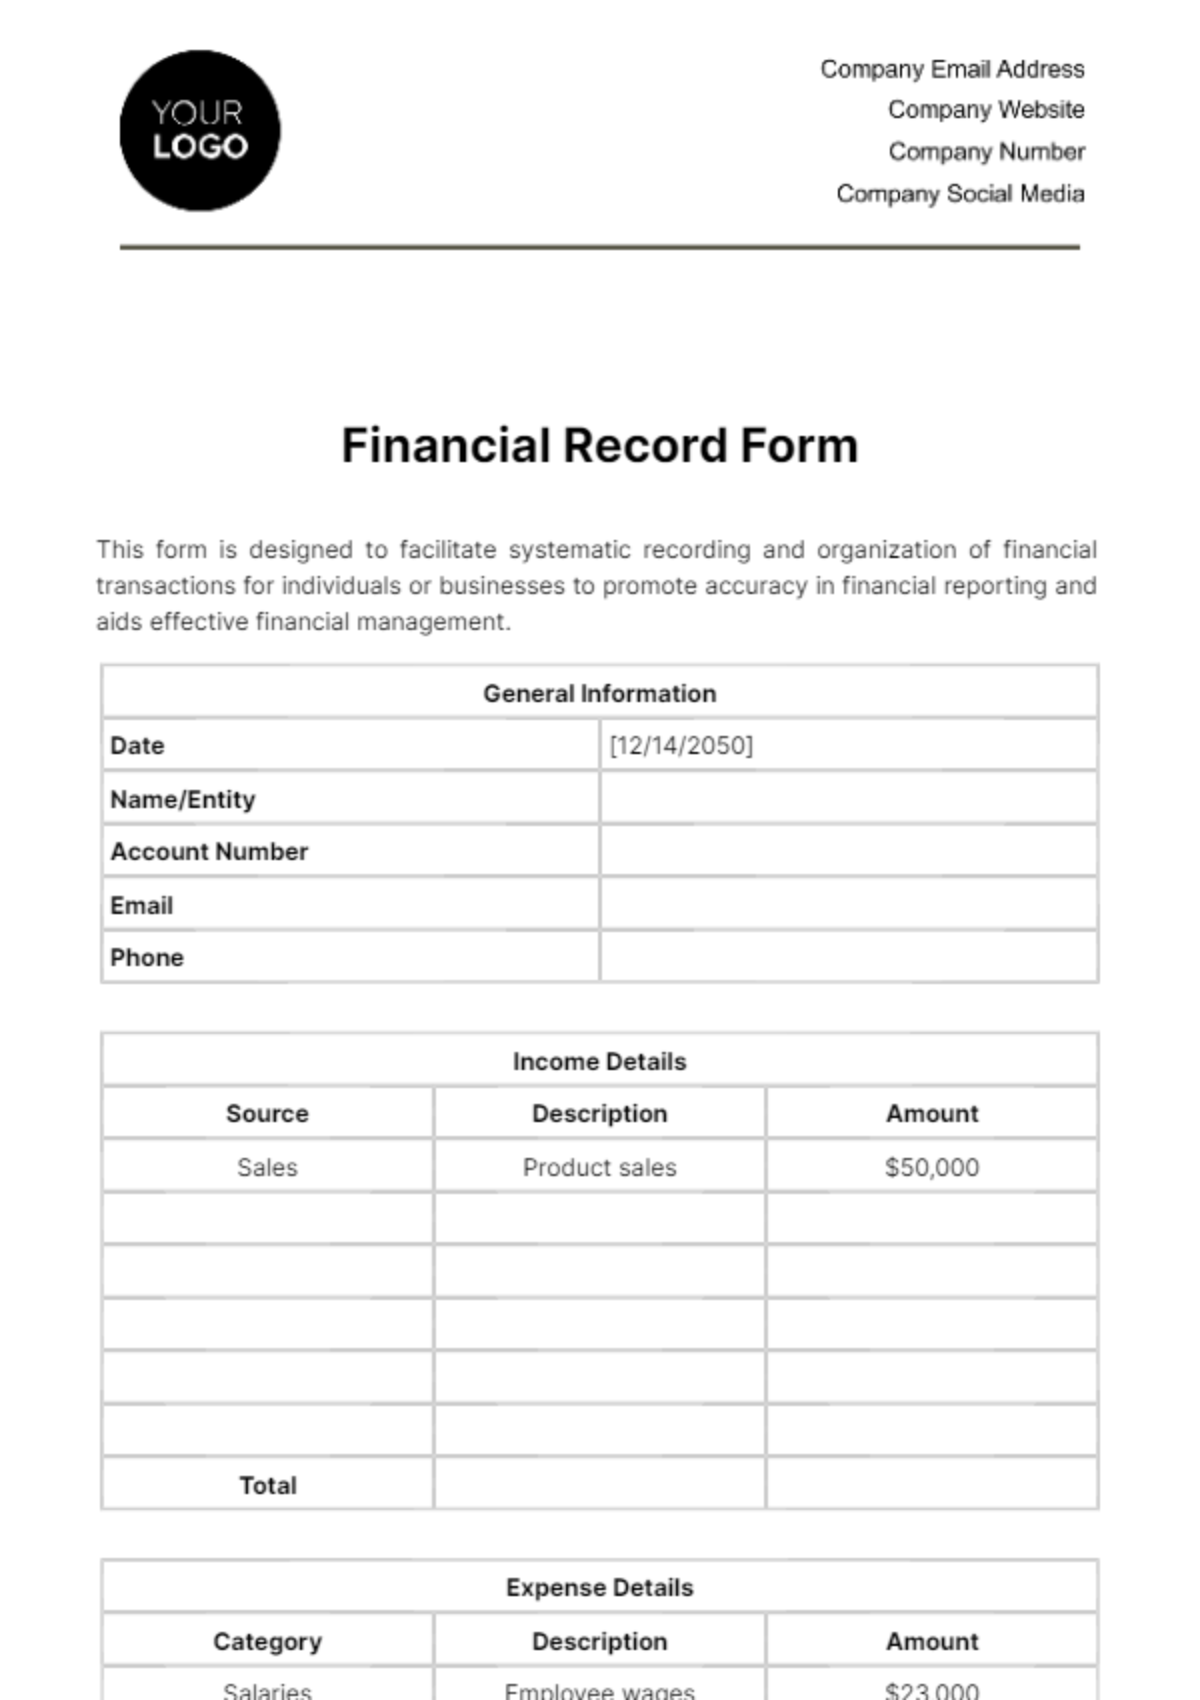 Free Financial Record Form Template